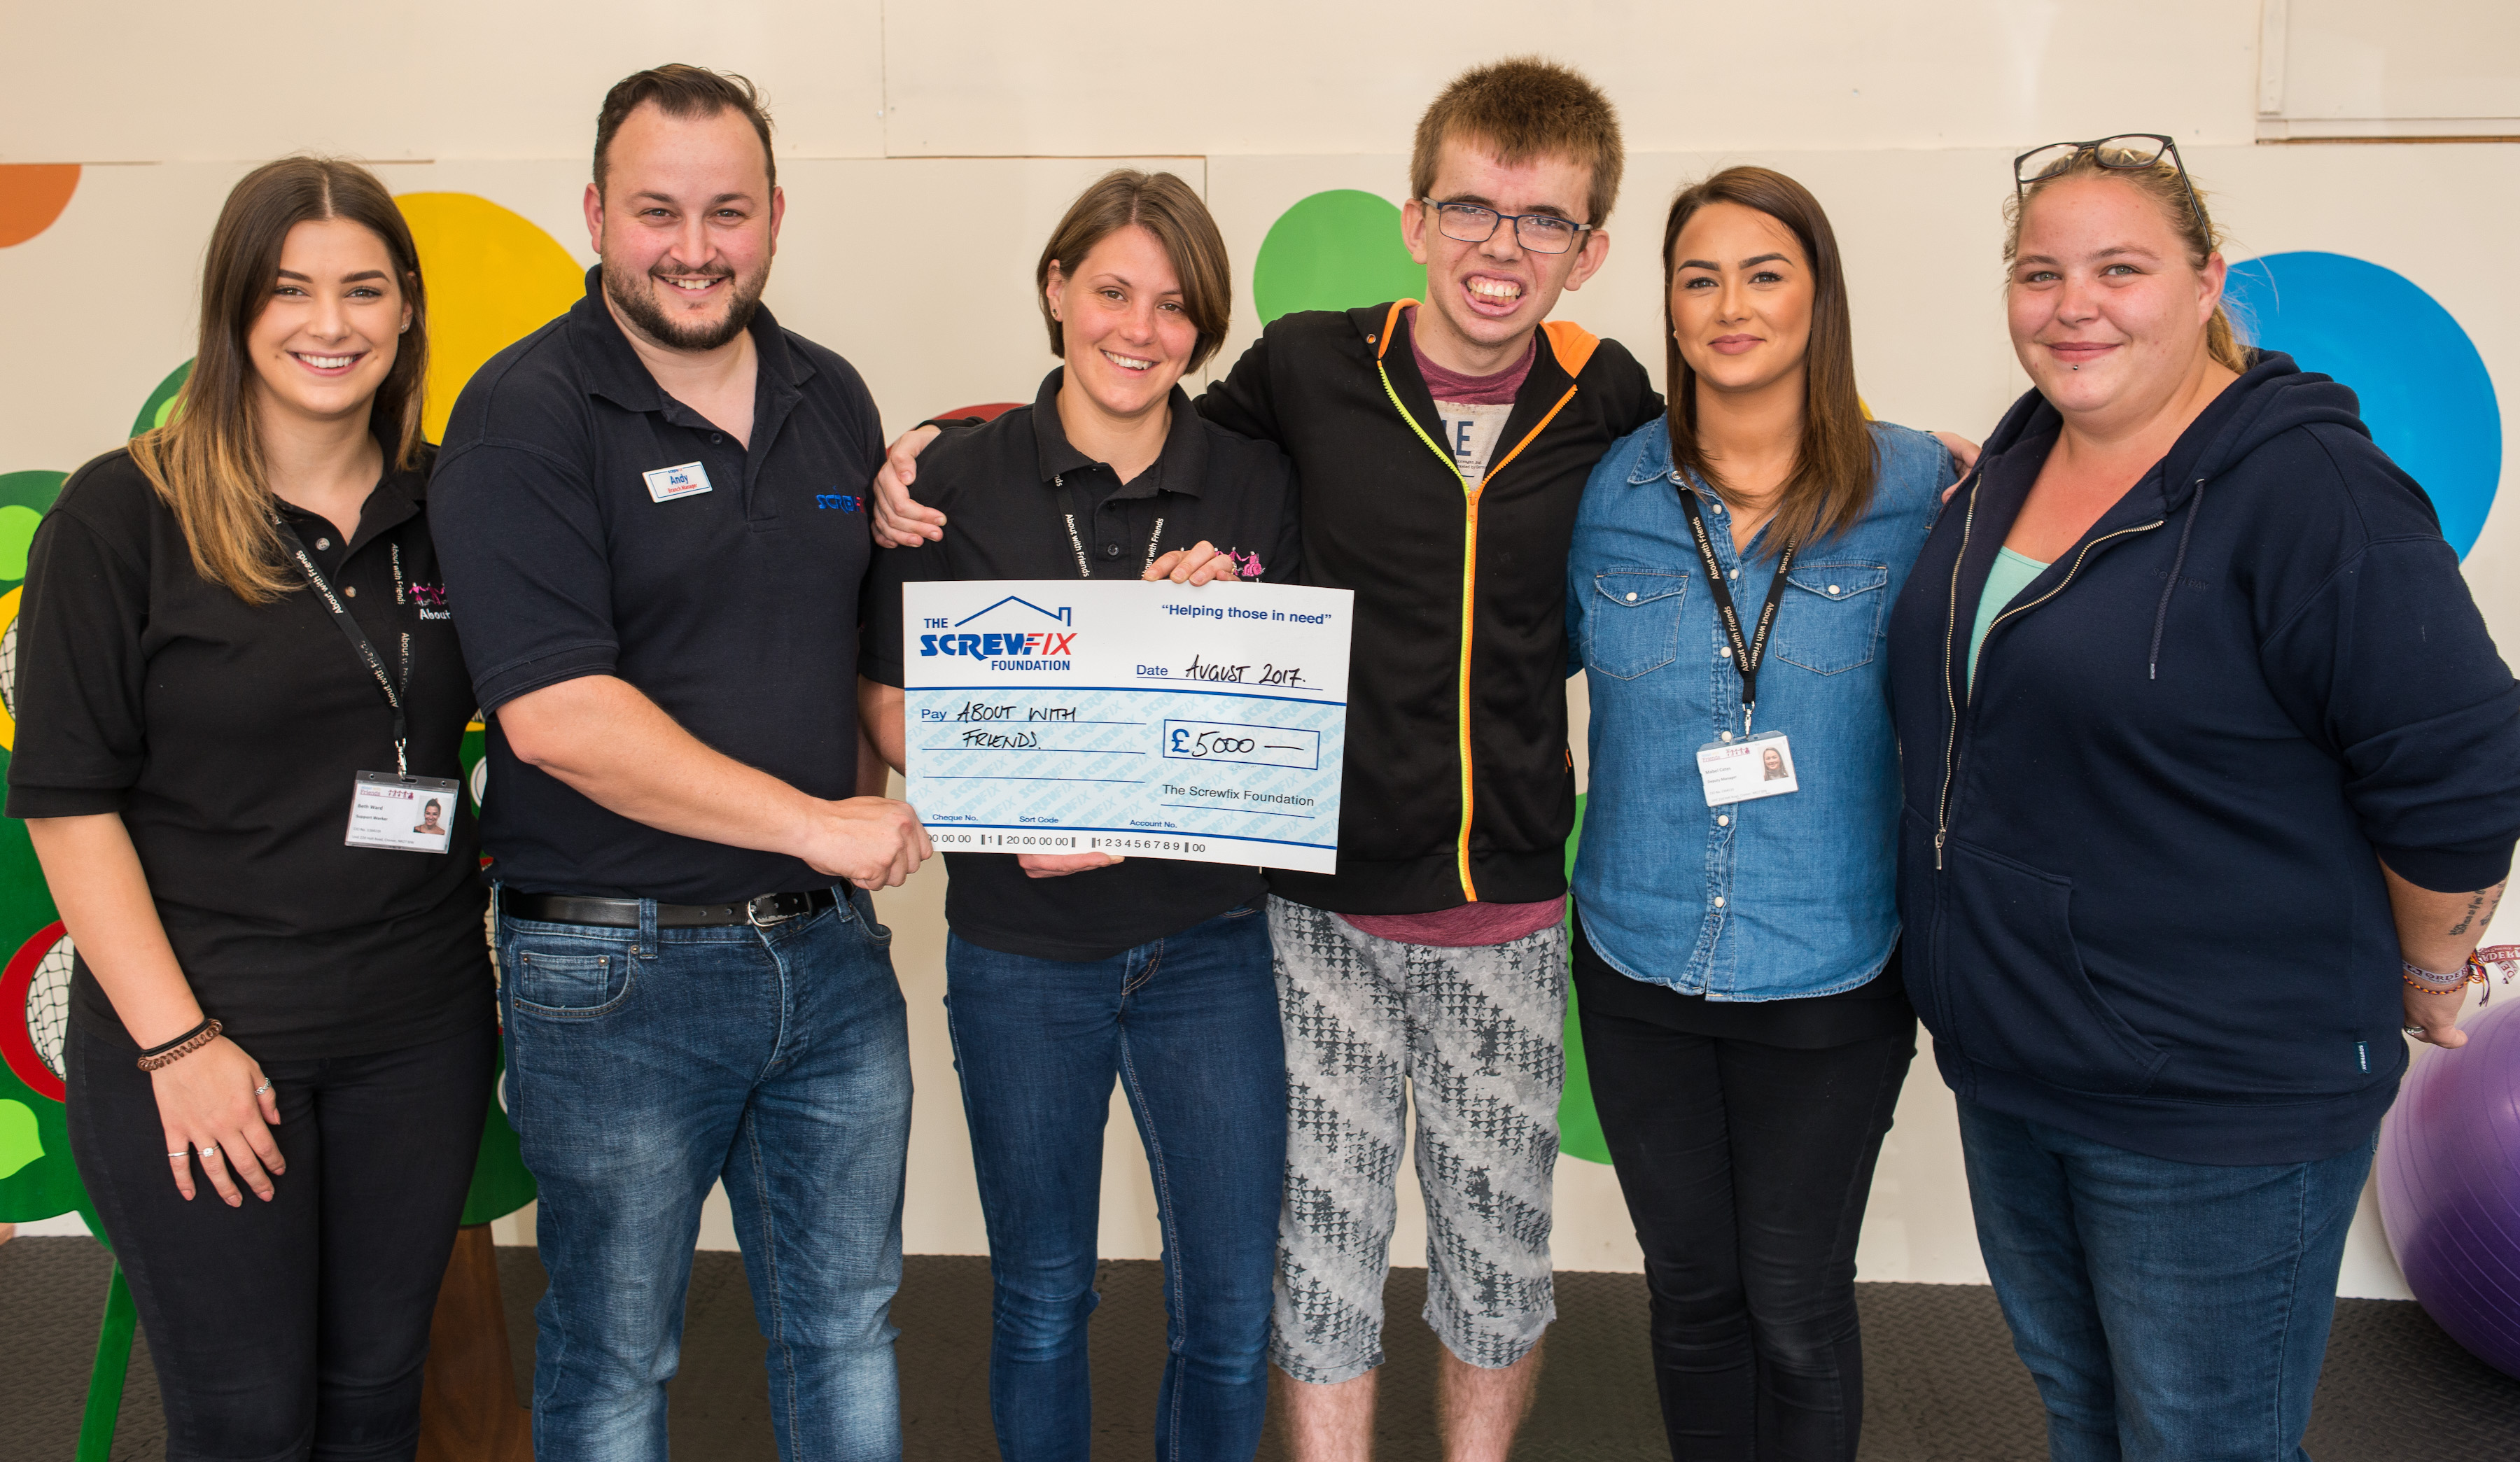 About With Friends gets a helping hand from the Screwfix Foundation